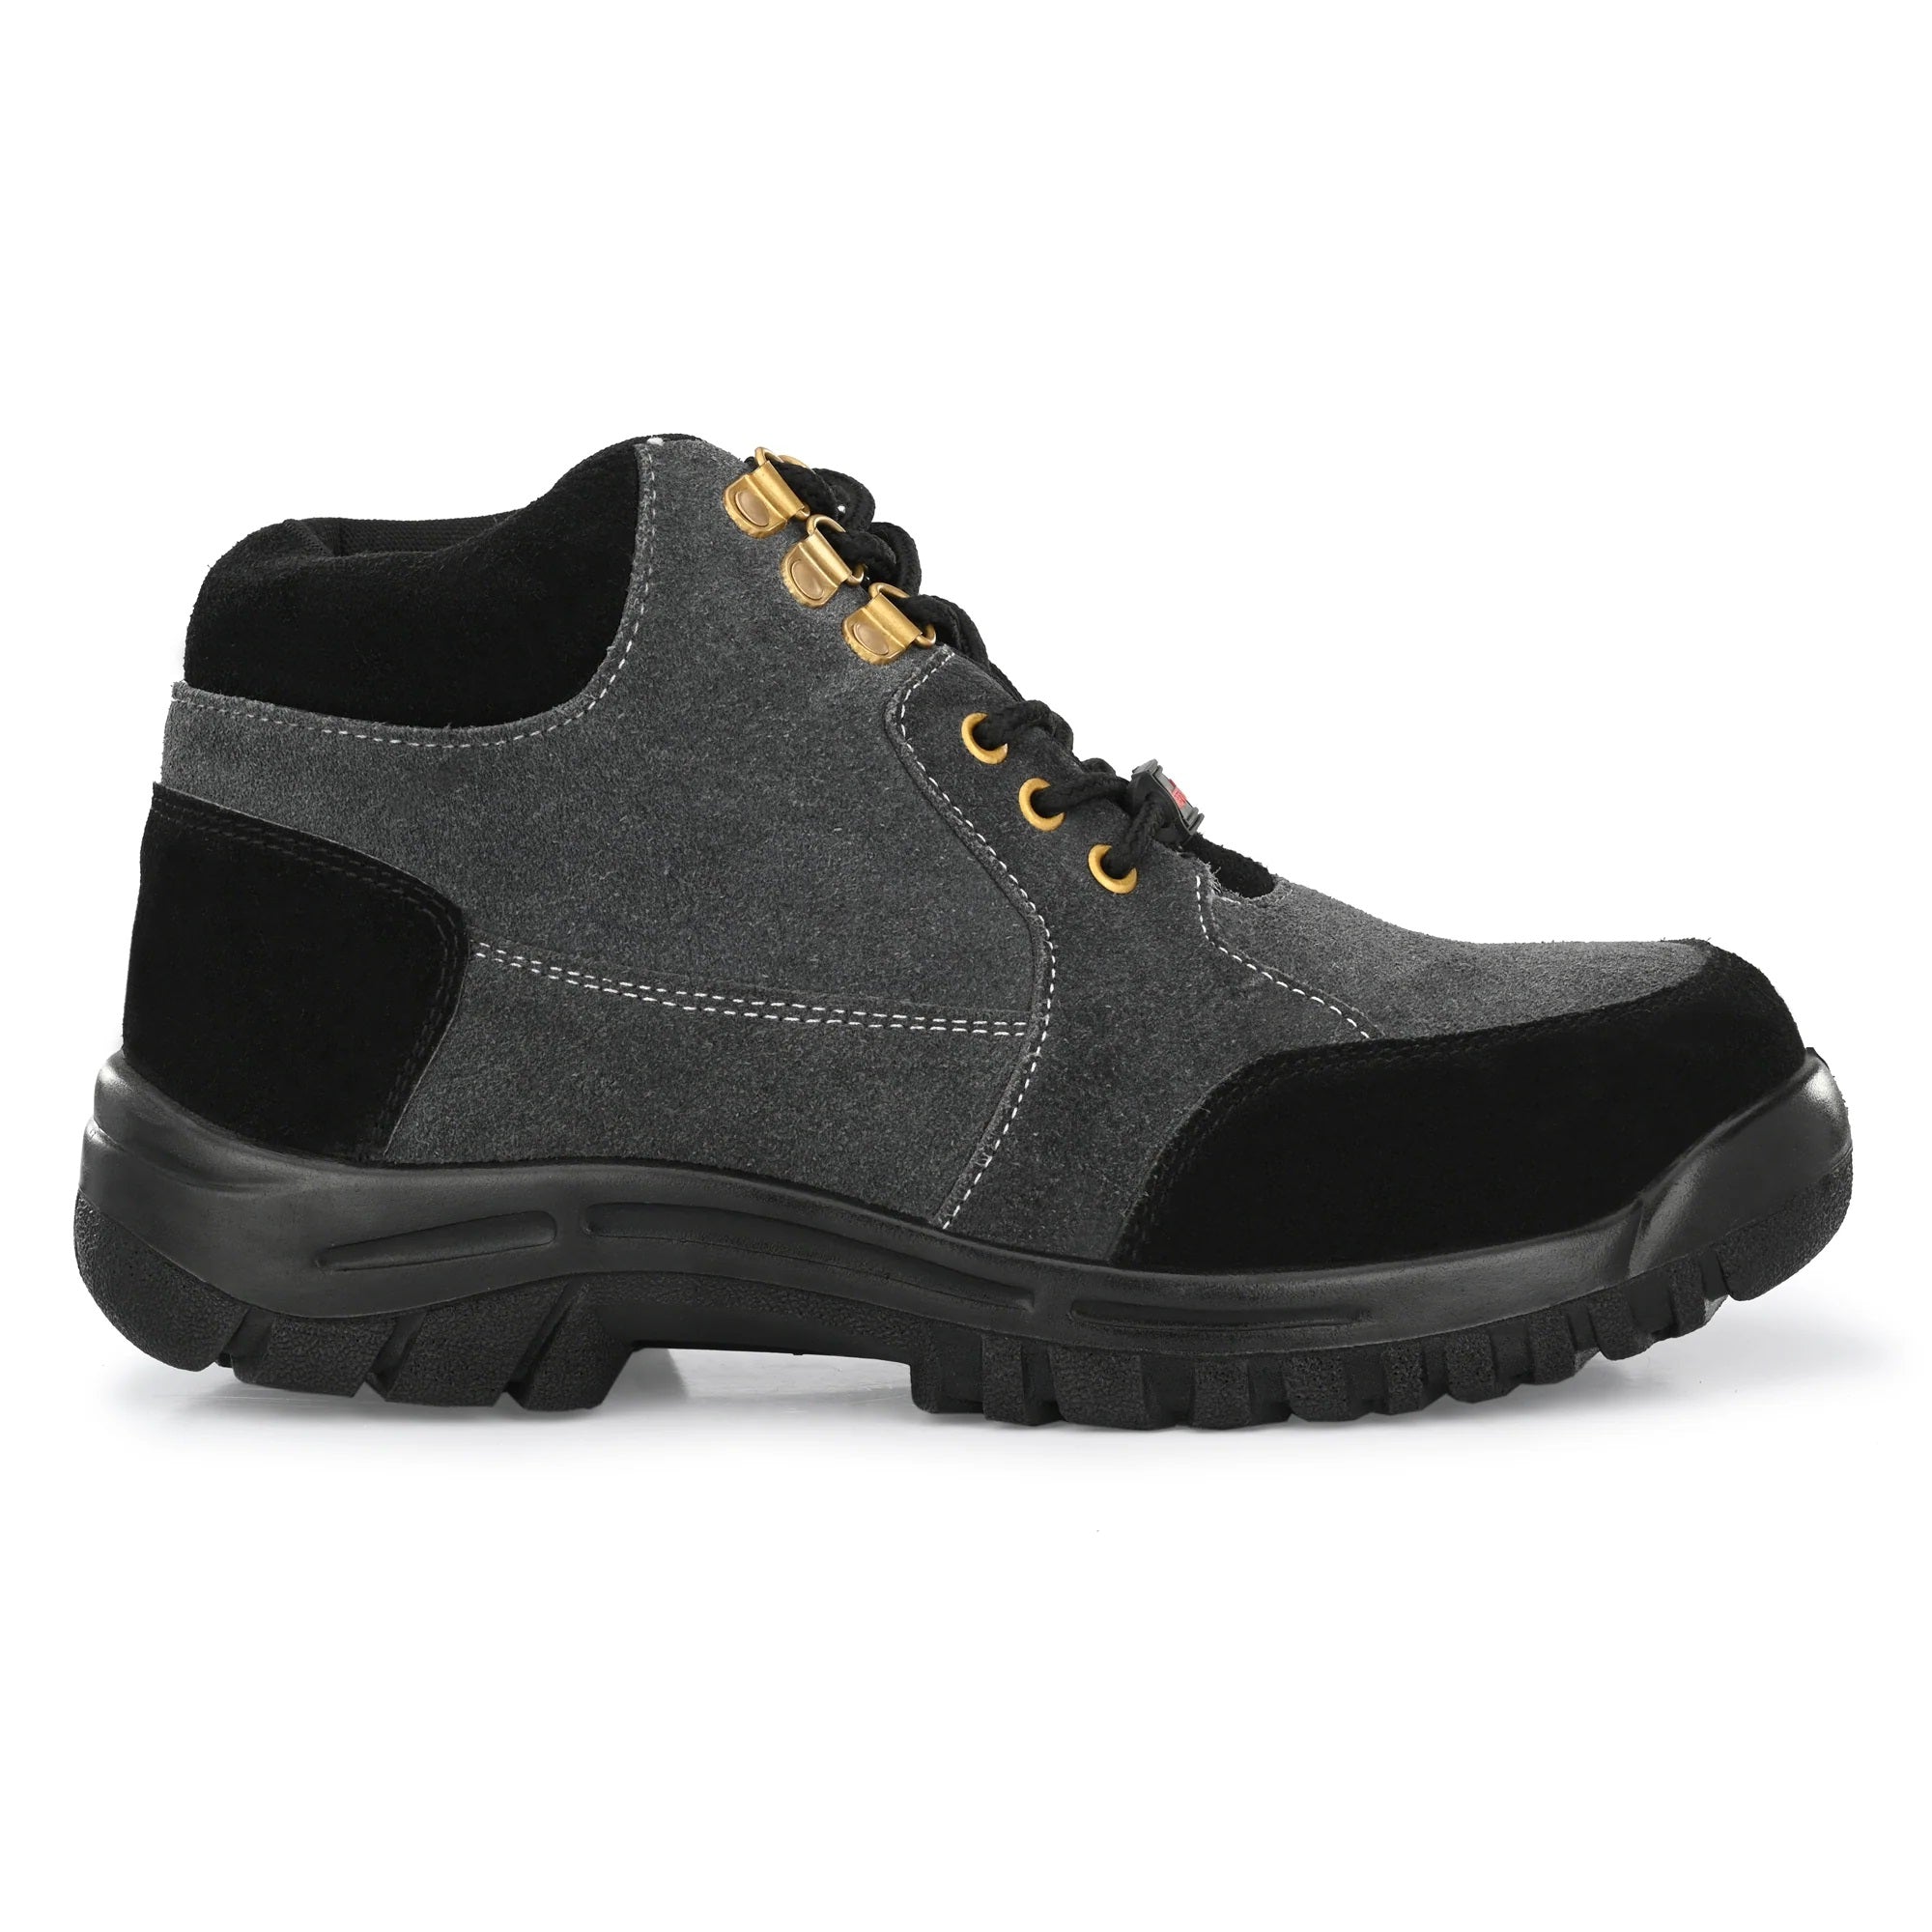 Kavacha Suede Leather Steel Toe Safety Shoe SM83